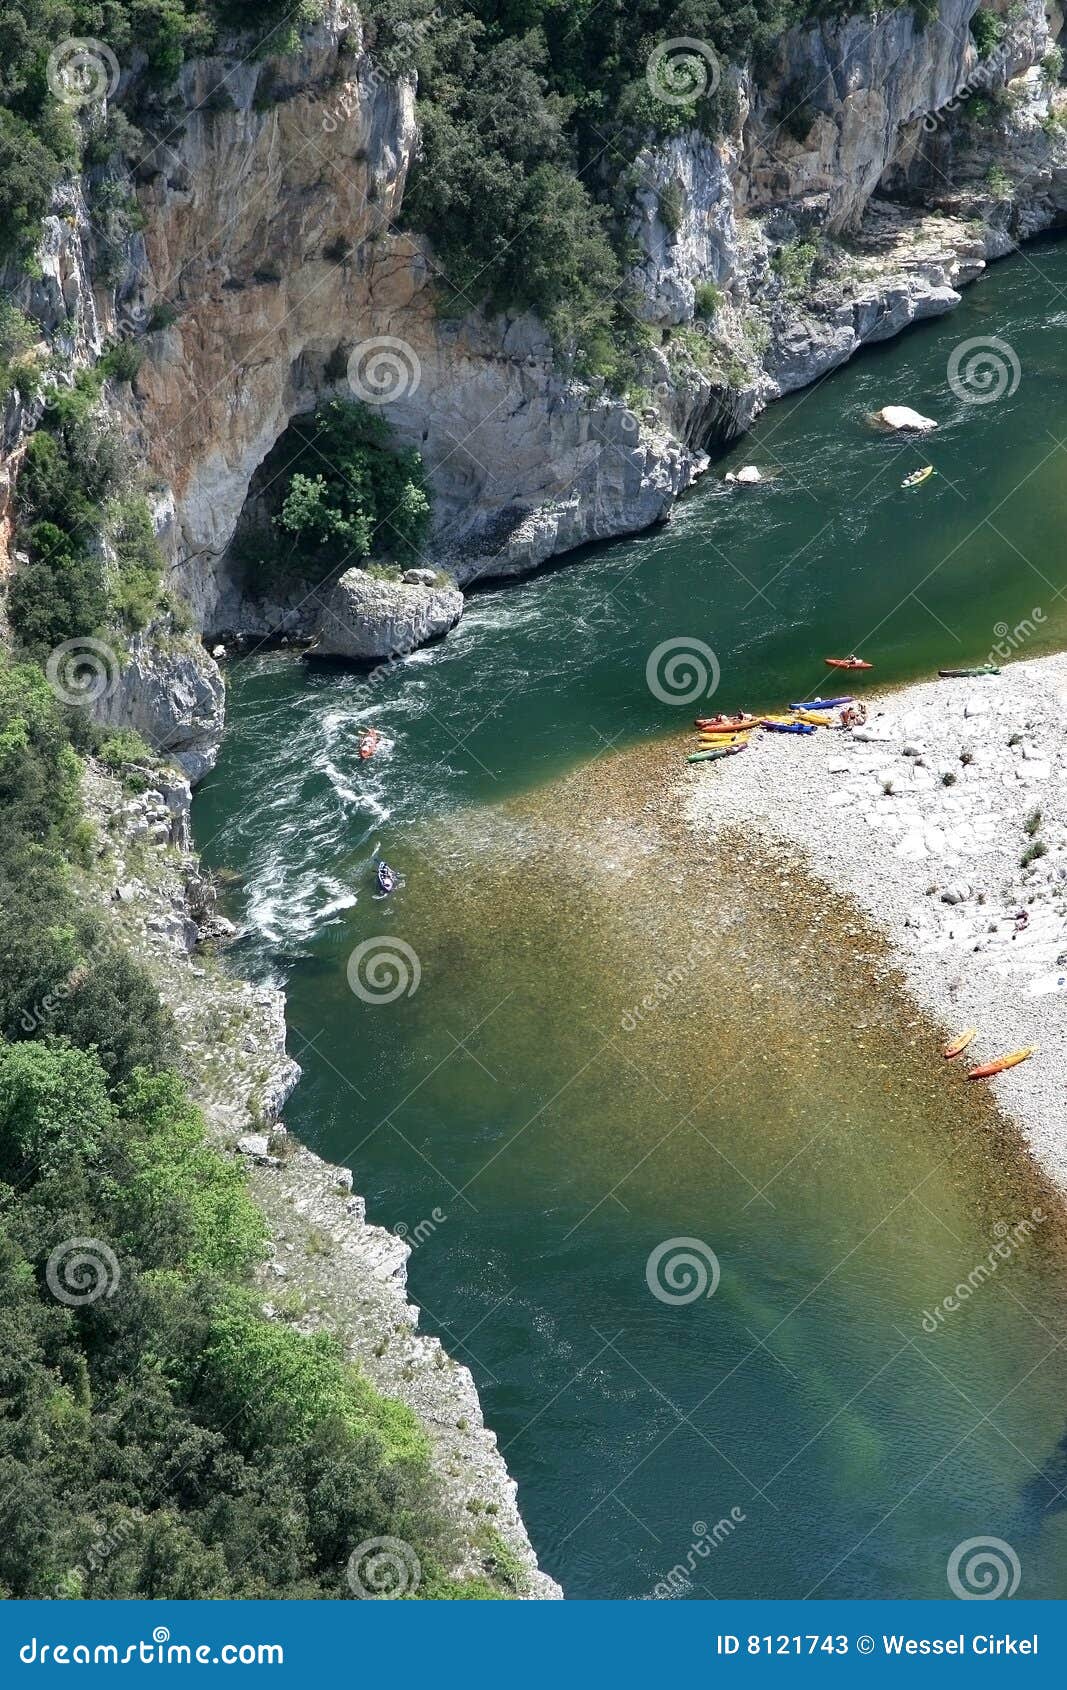 paddling at the french ardeche river